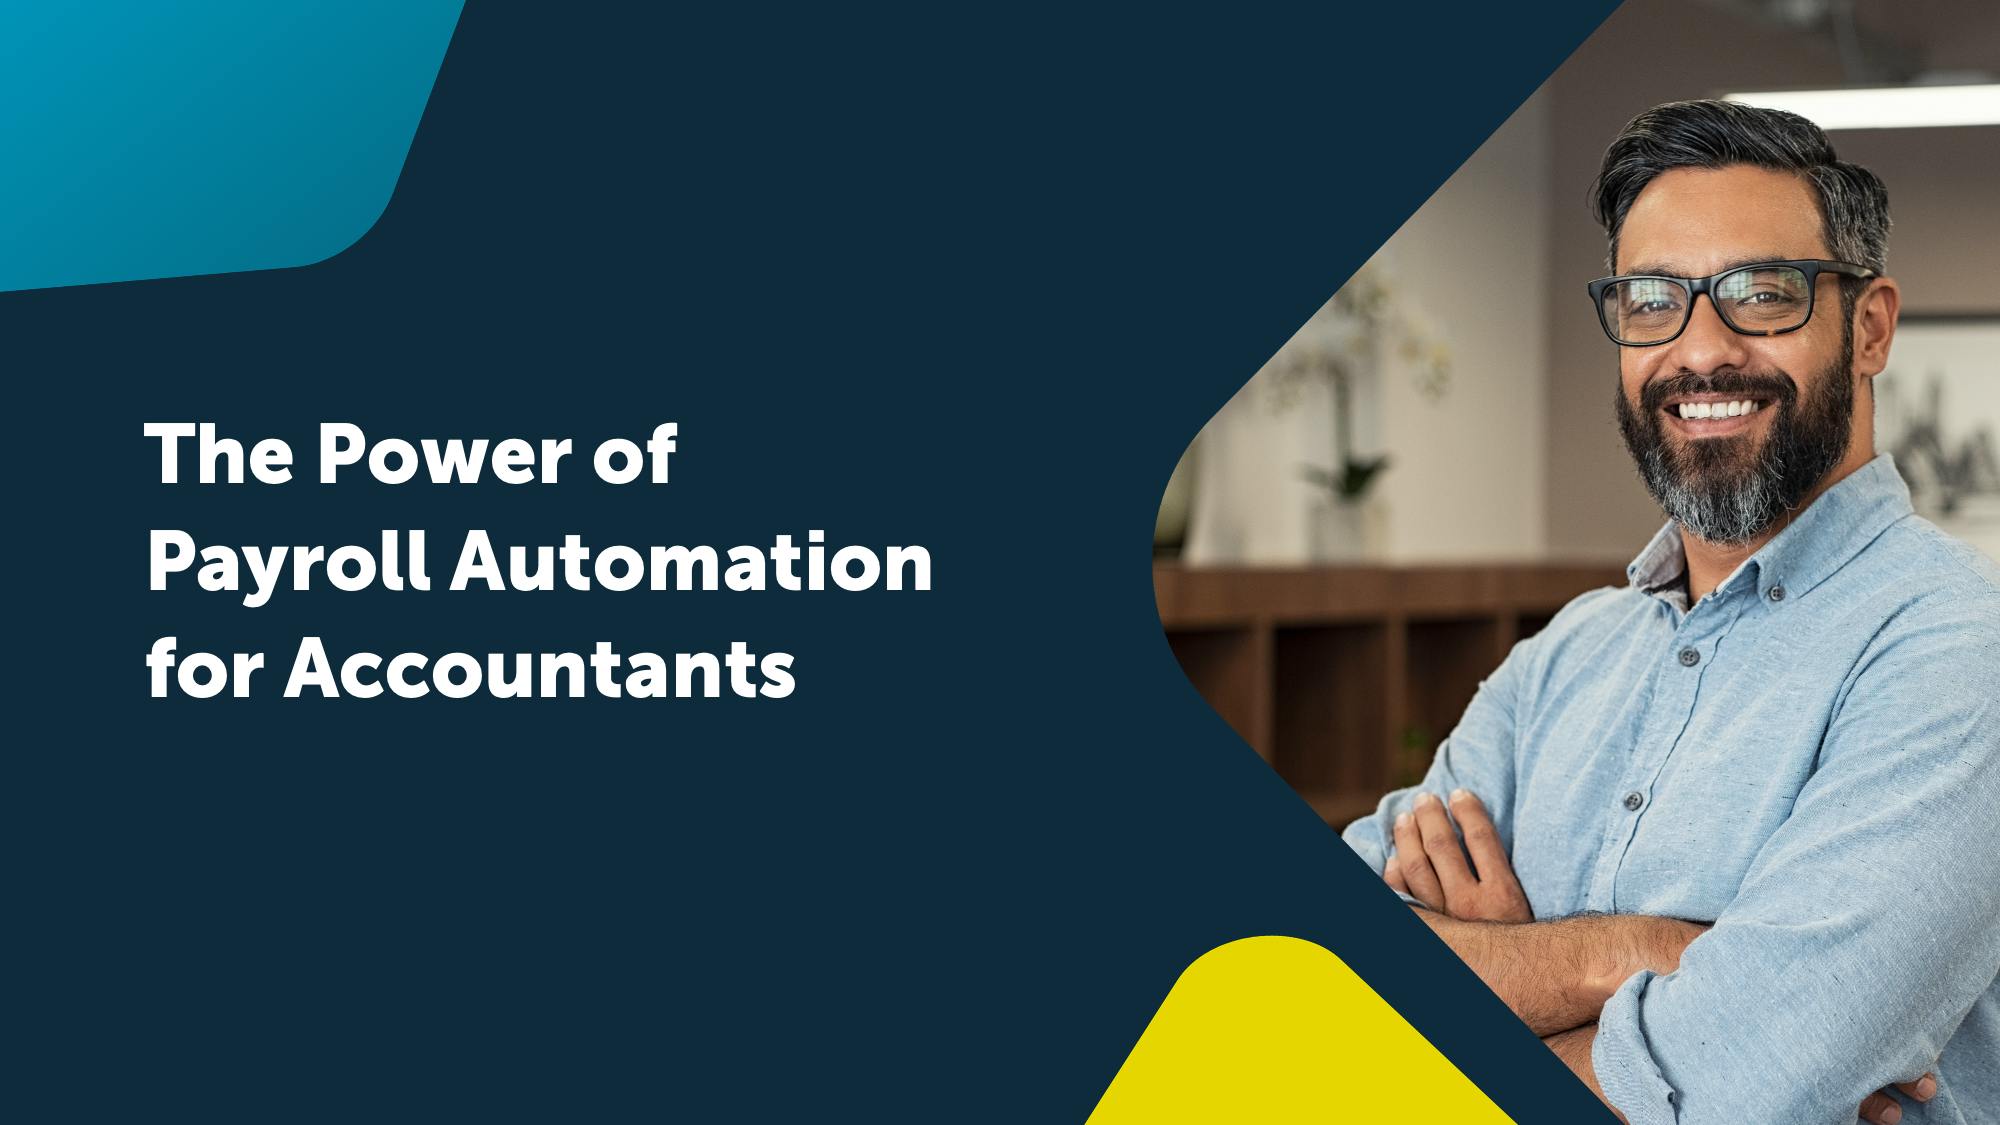 The Power of Payroll Automation for Accountants